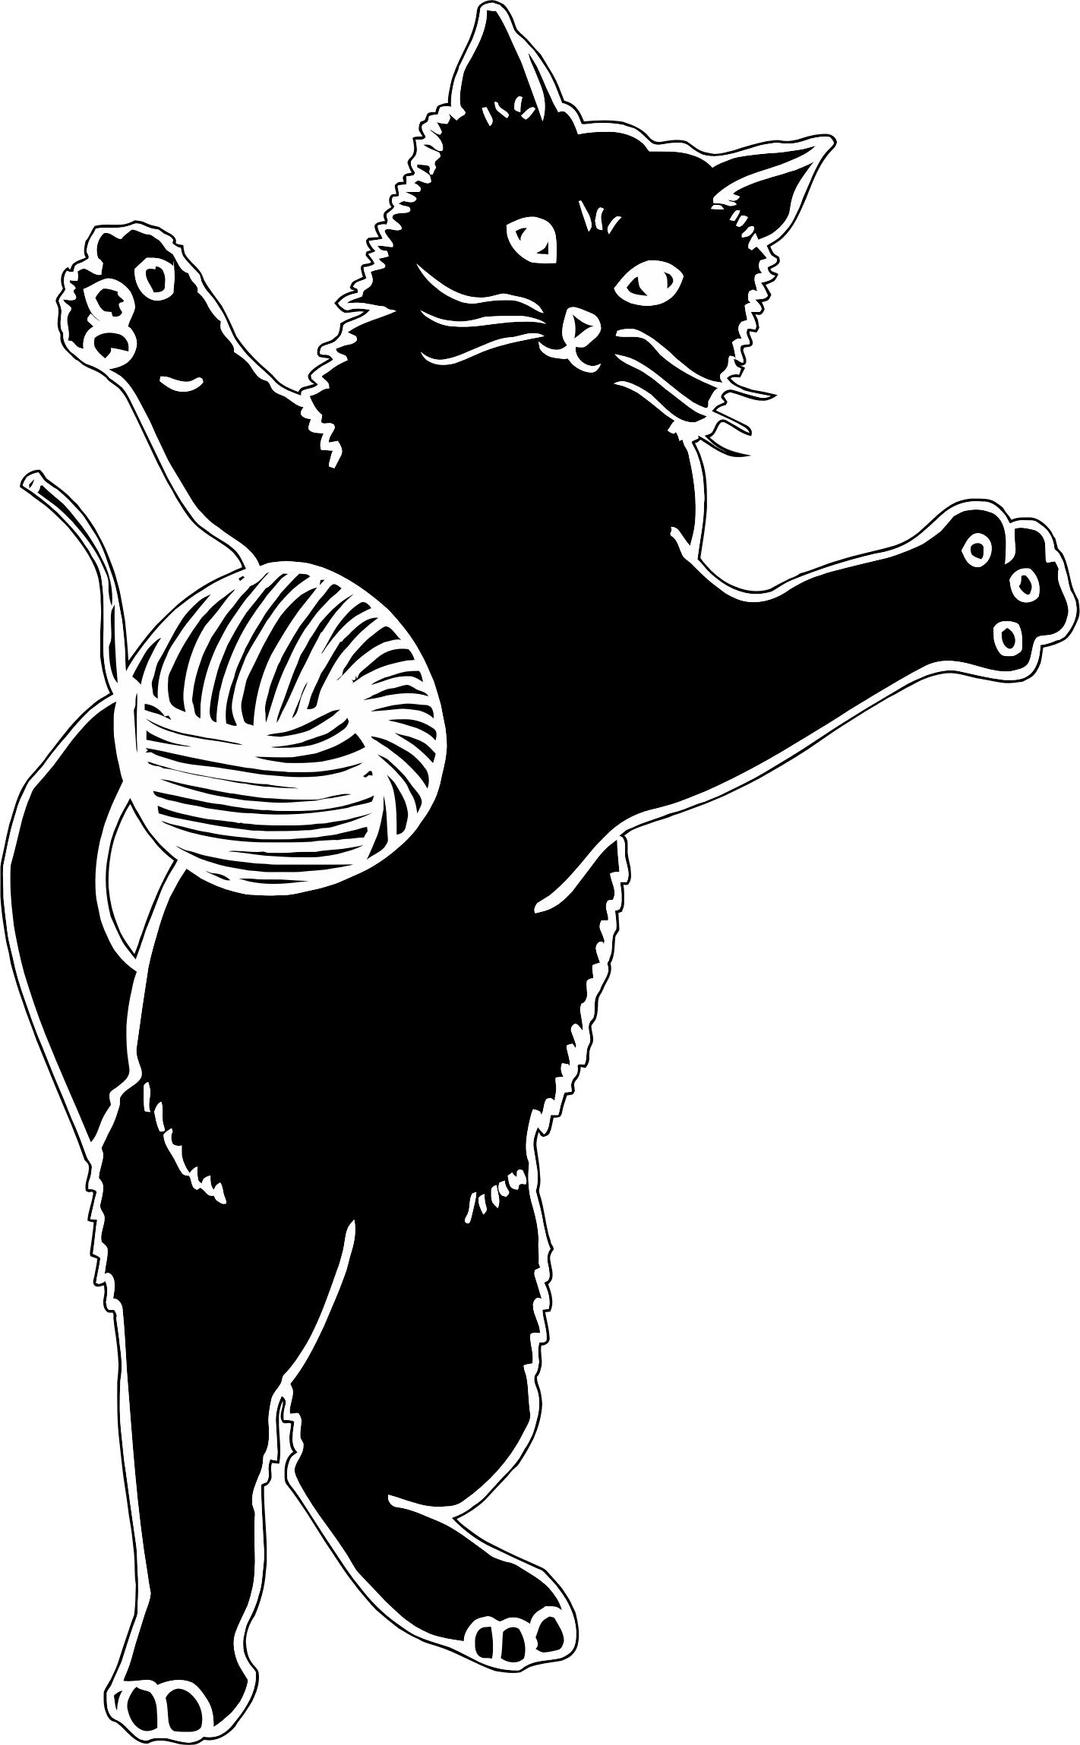 Cat Playing With Ball Of Yarn Silhouette png transparent